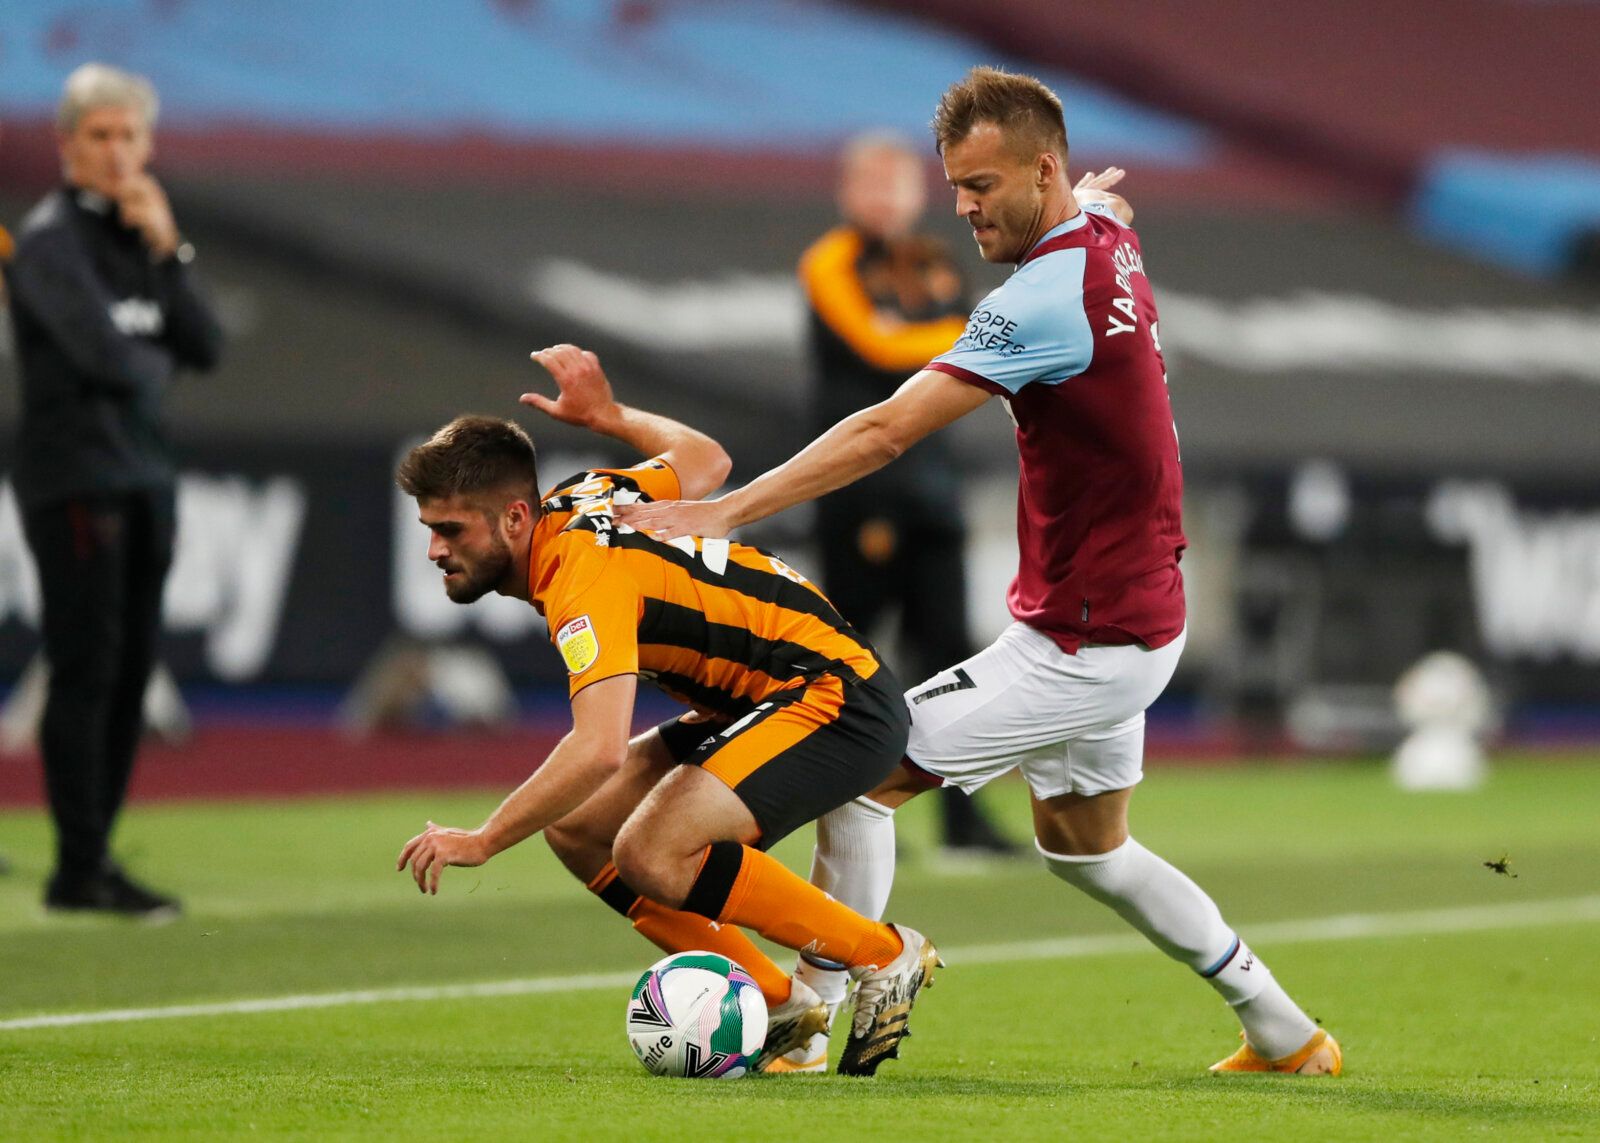 Soccer Football - Carabao Cup Third Round - West Ham United v Hull City - London Stadium, London, Britain - September 22, 2020.  Hull City's Brandon Fleming in action with West Ham United's Andriy Yarmolenko. Pool via REUTERS/Alastair Grant EDITORIAL USE ONLY. No use with unauthorized audio, video, data, fixture lists, club/league logos or 'live' services. Online in-match use limited to 75 images, no video emulation. No use in betting, games or single club/league/player publications.  Please con